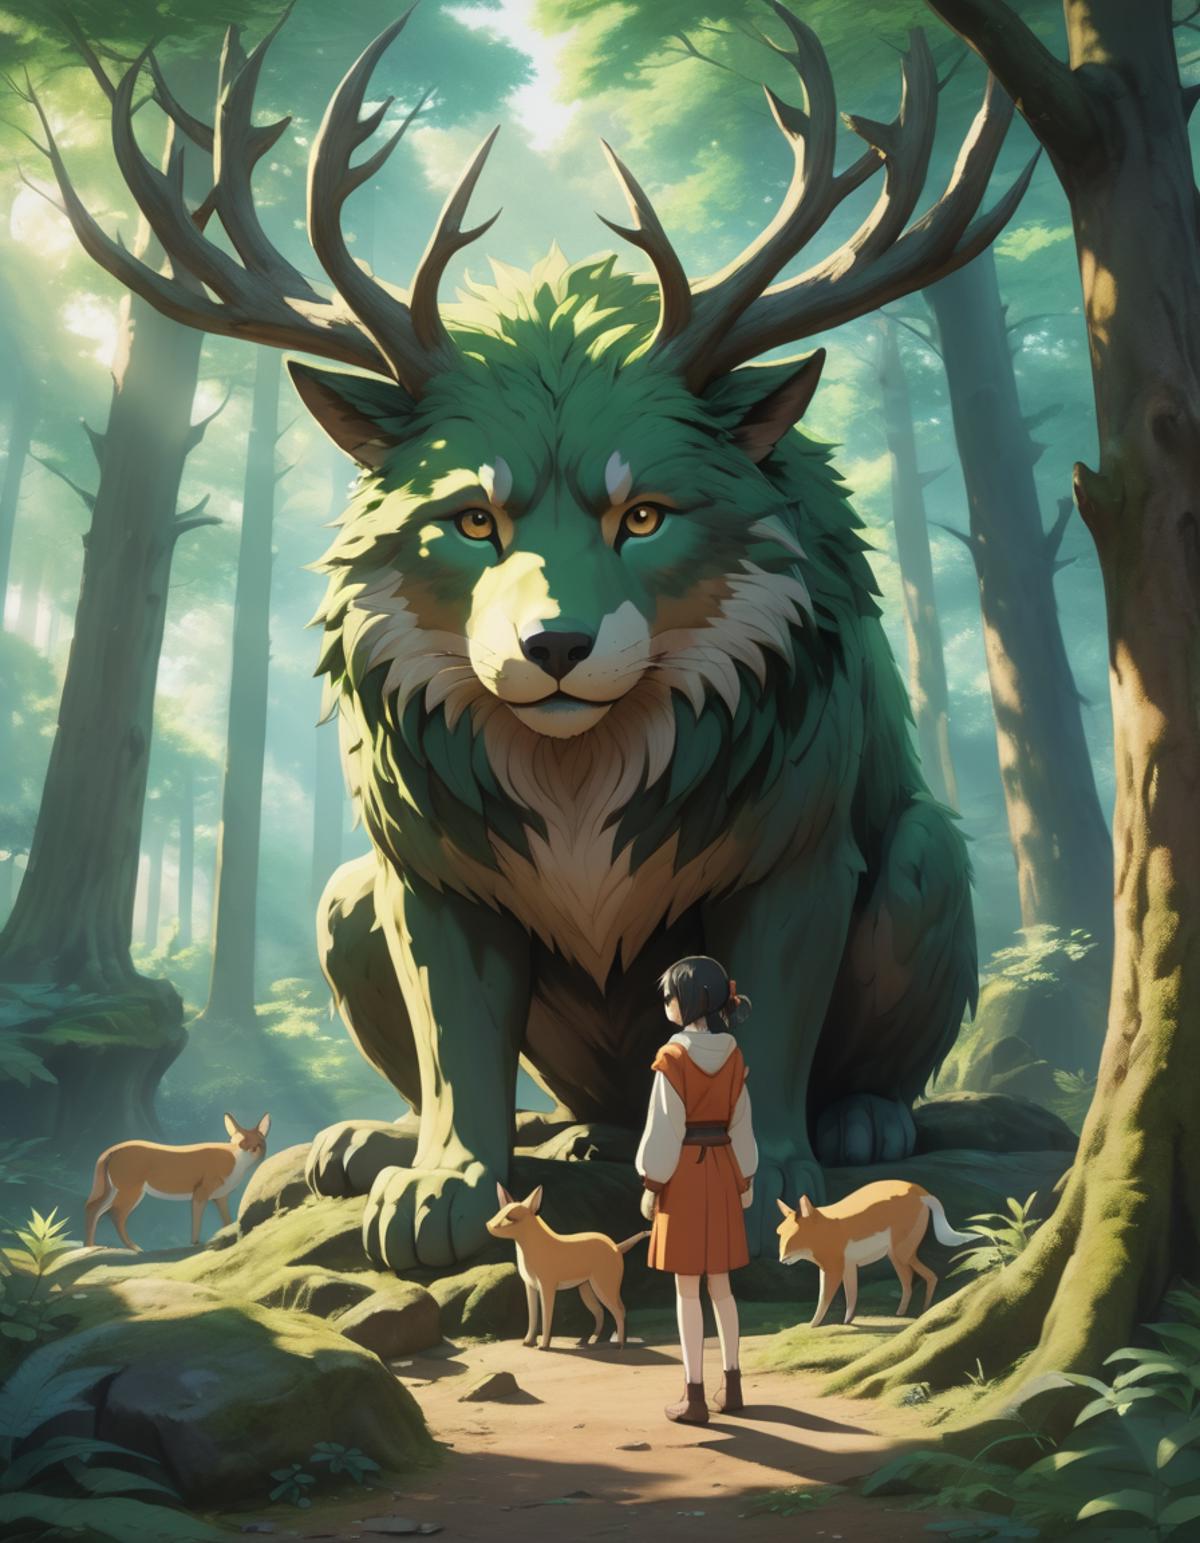 A large green monster with horns sits in the forest, surrounded by small deer.